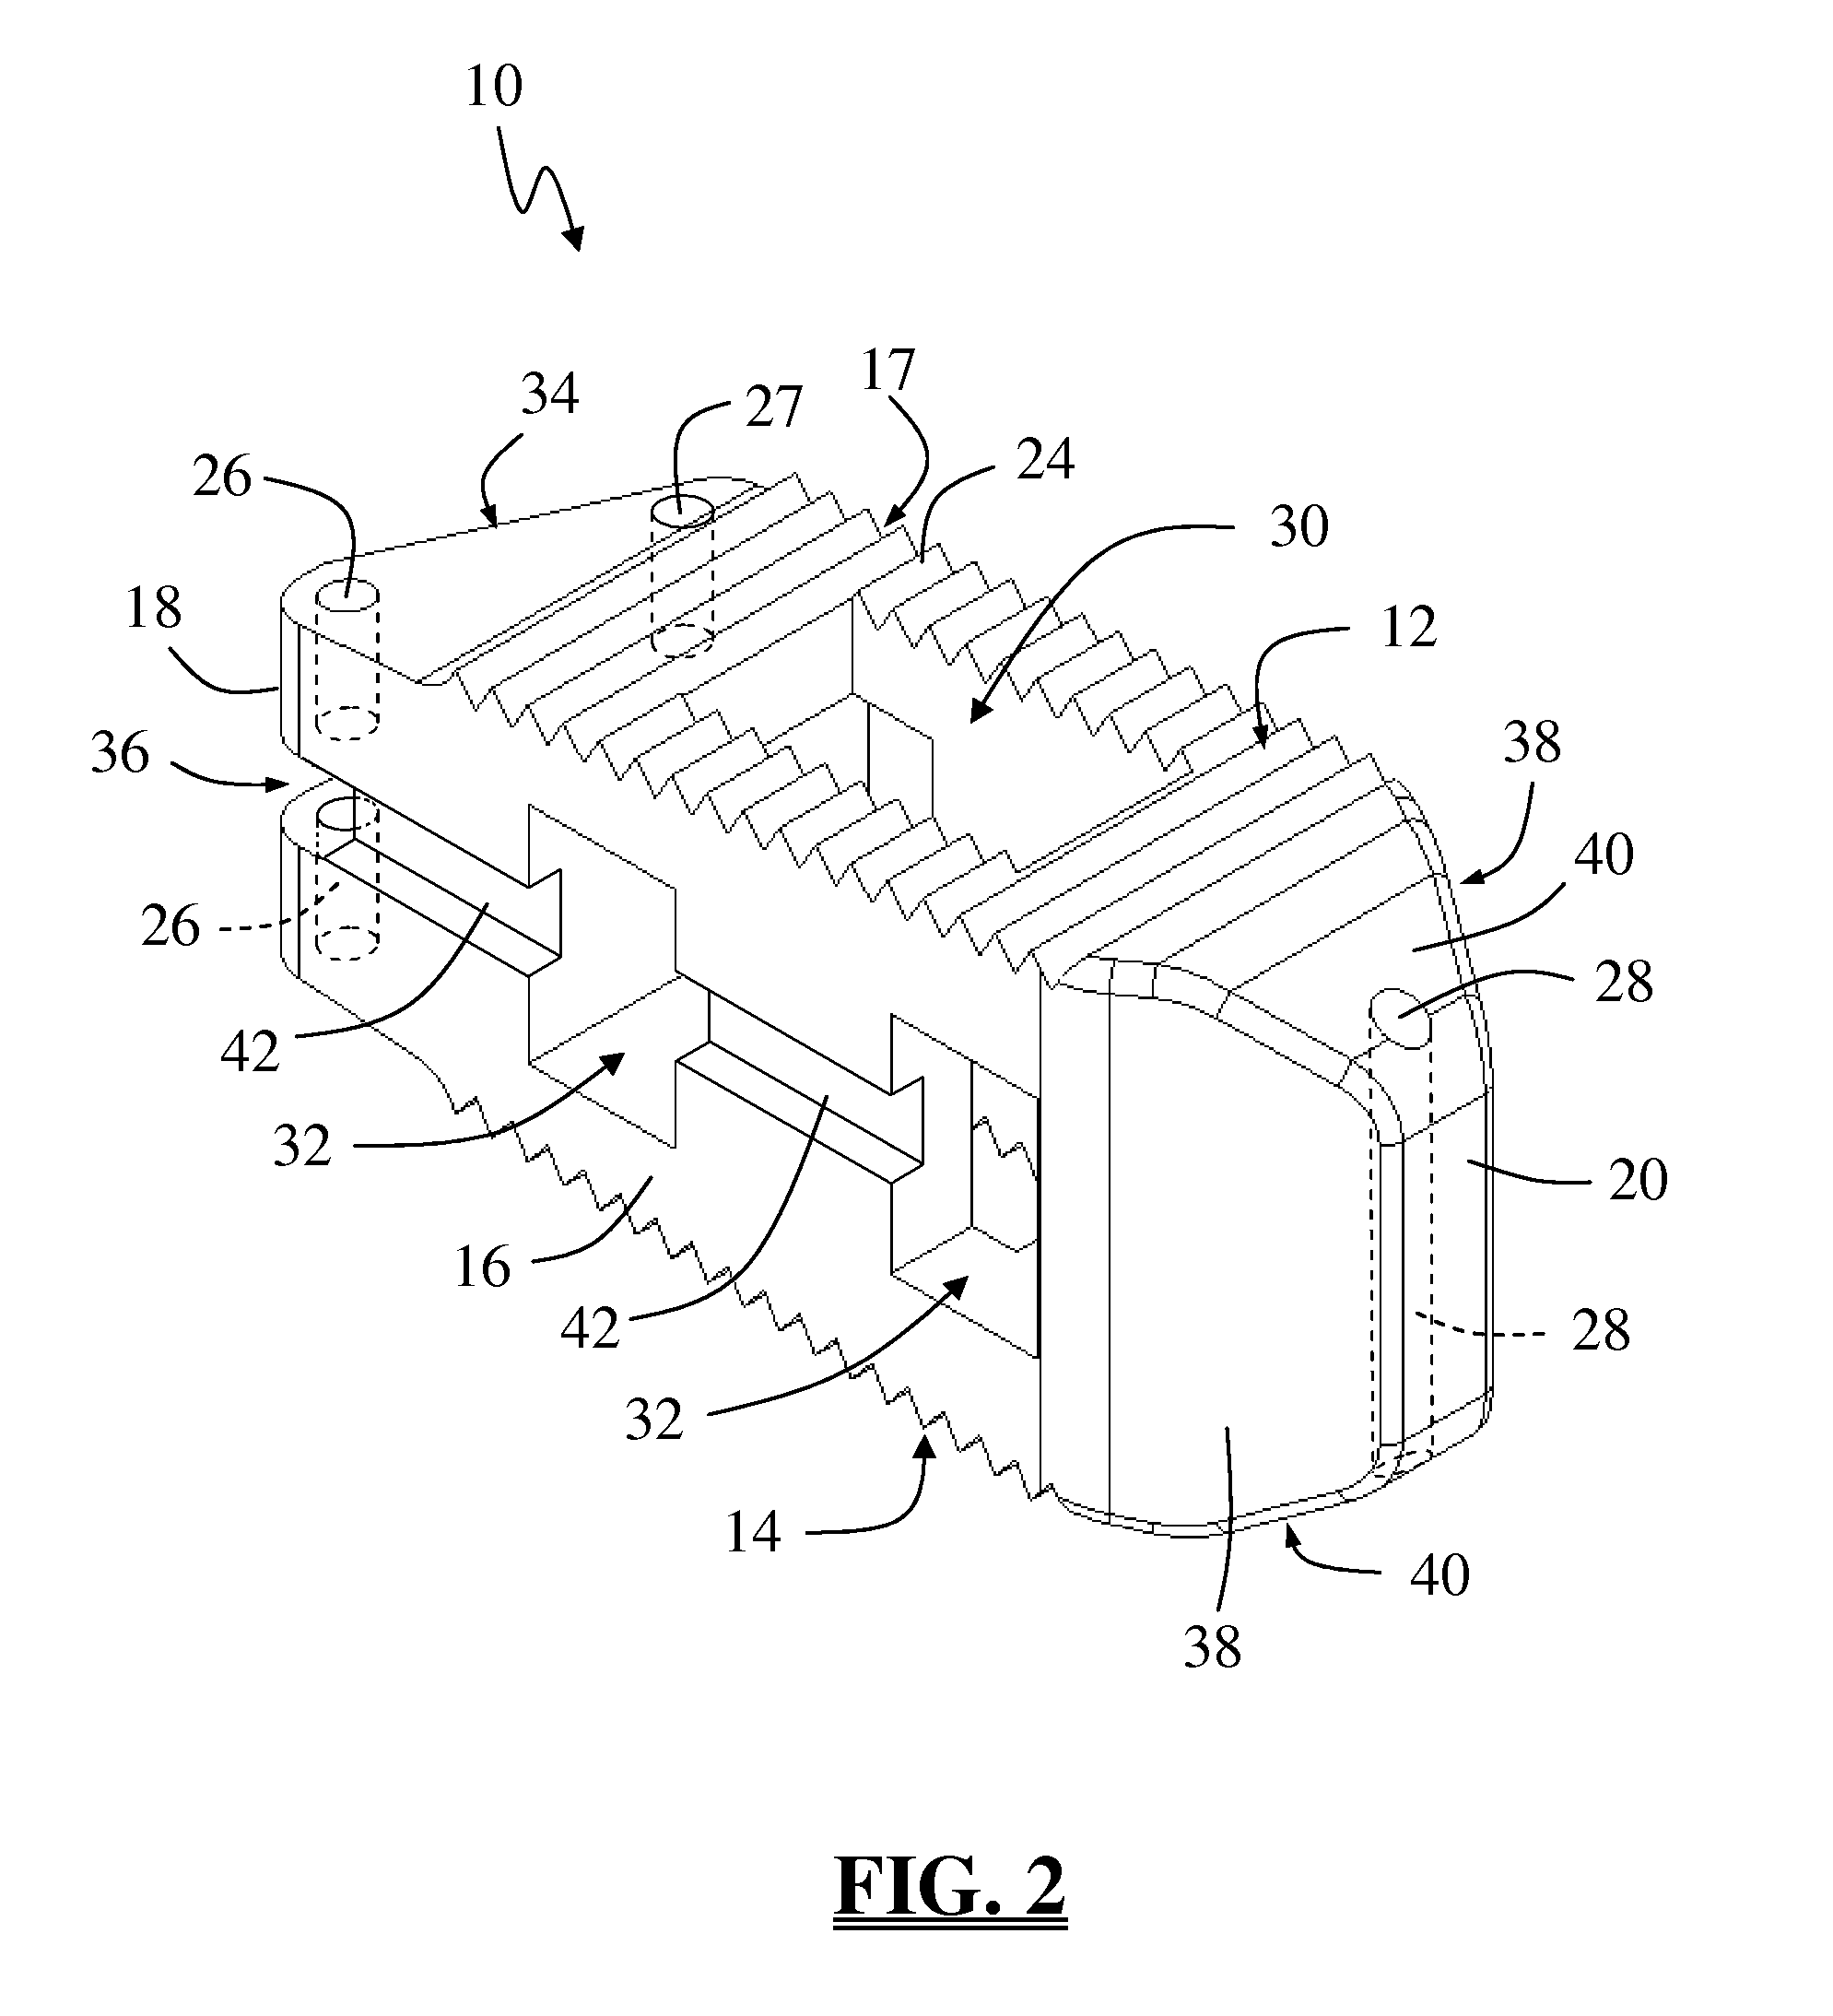 Spinal fusion implant and related methods